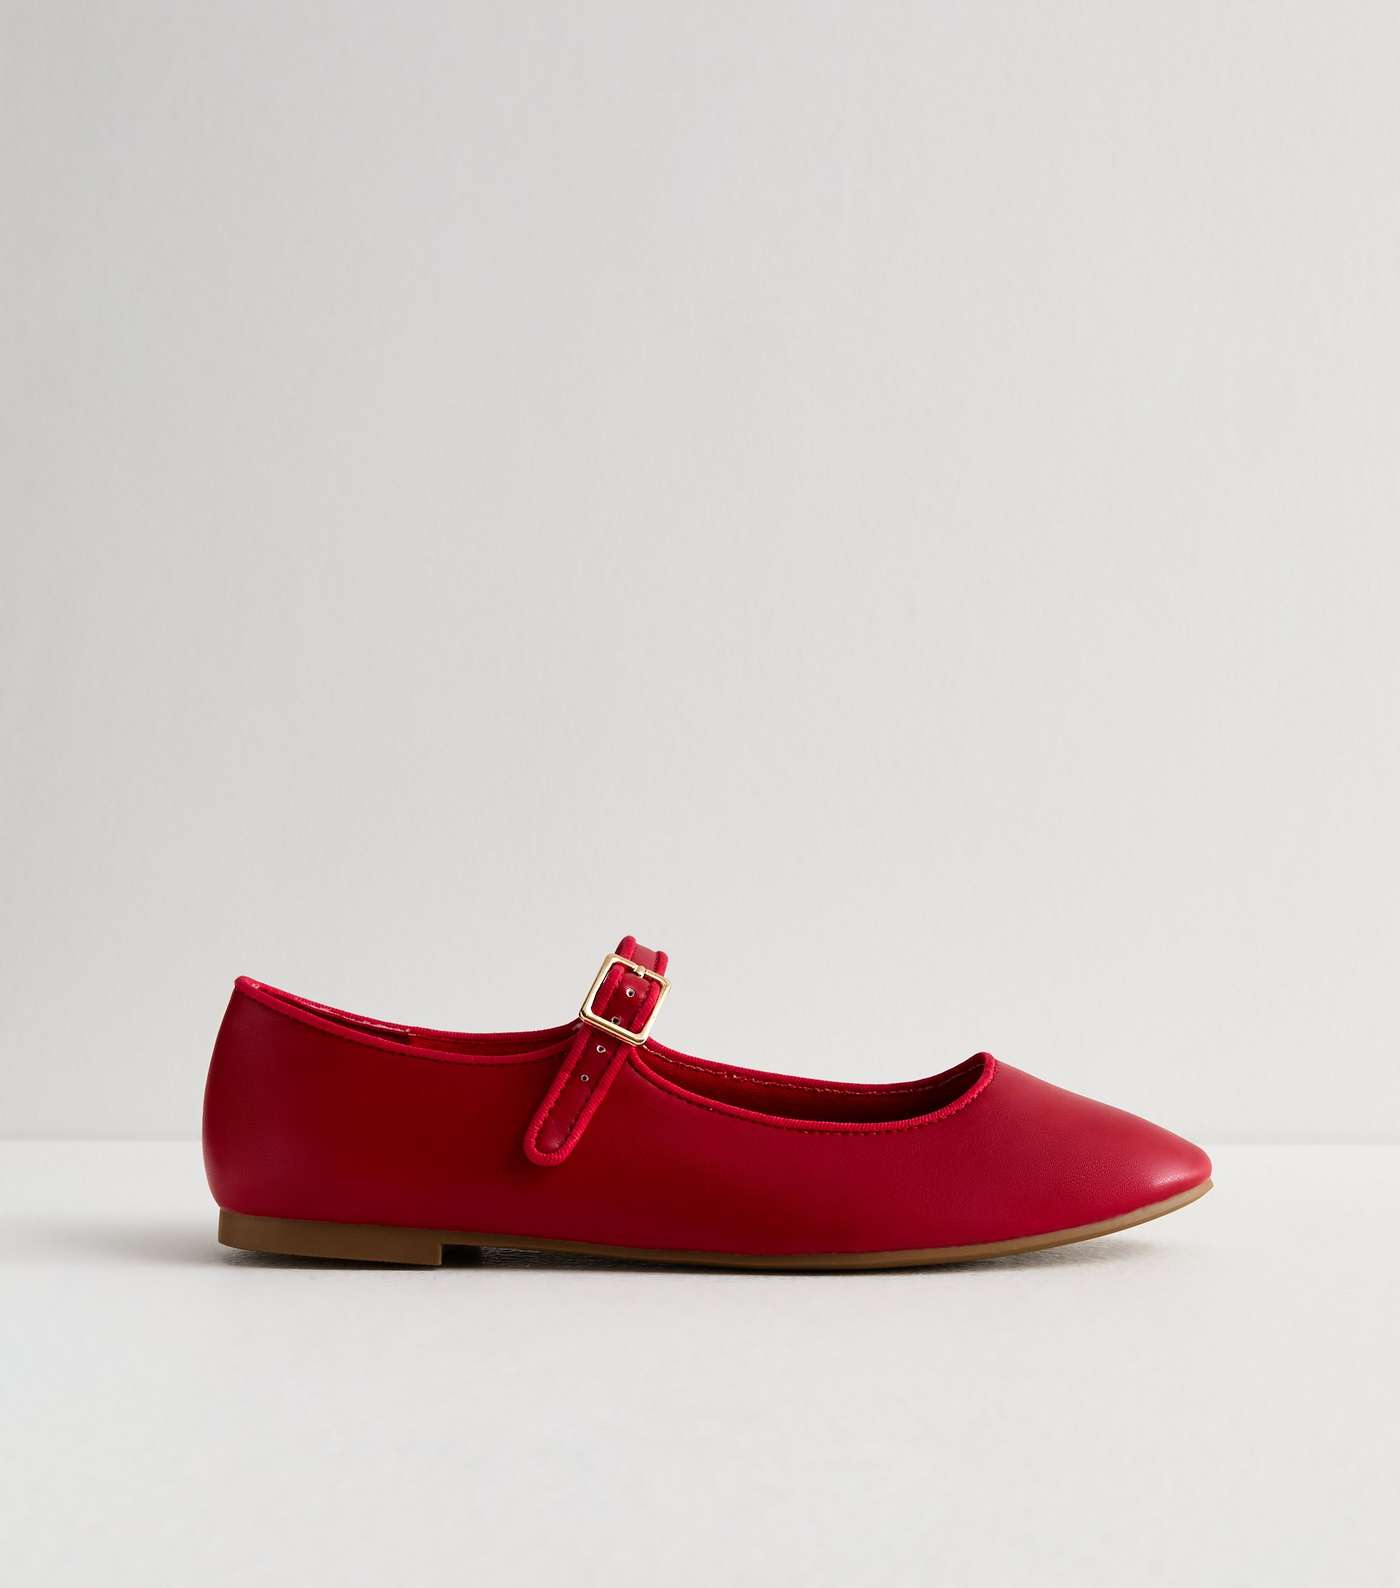 Red Leather-Look Strappy Mary Jane Ballerina Pumps Image 5